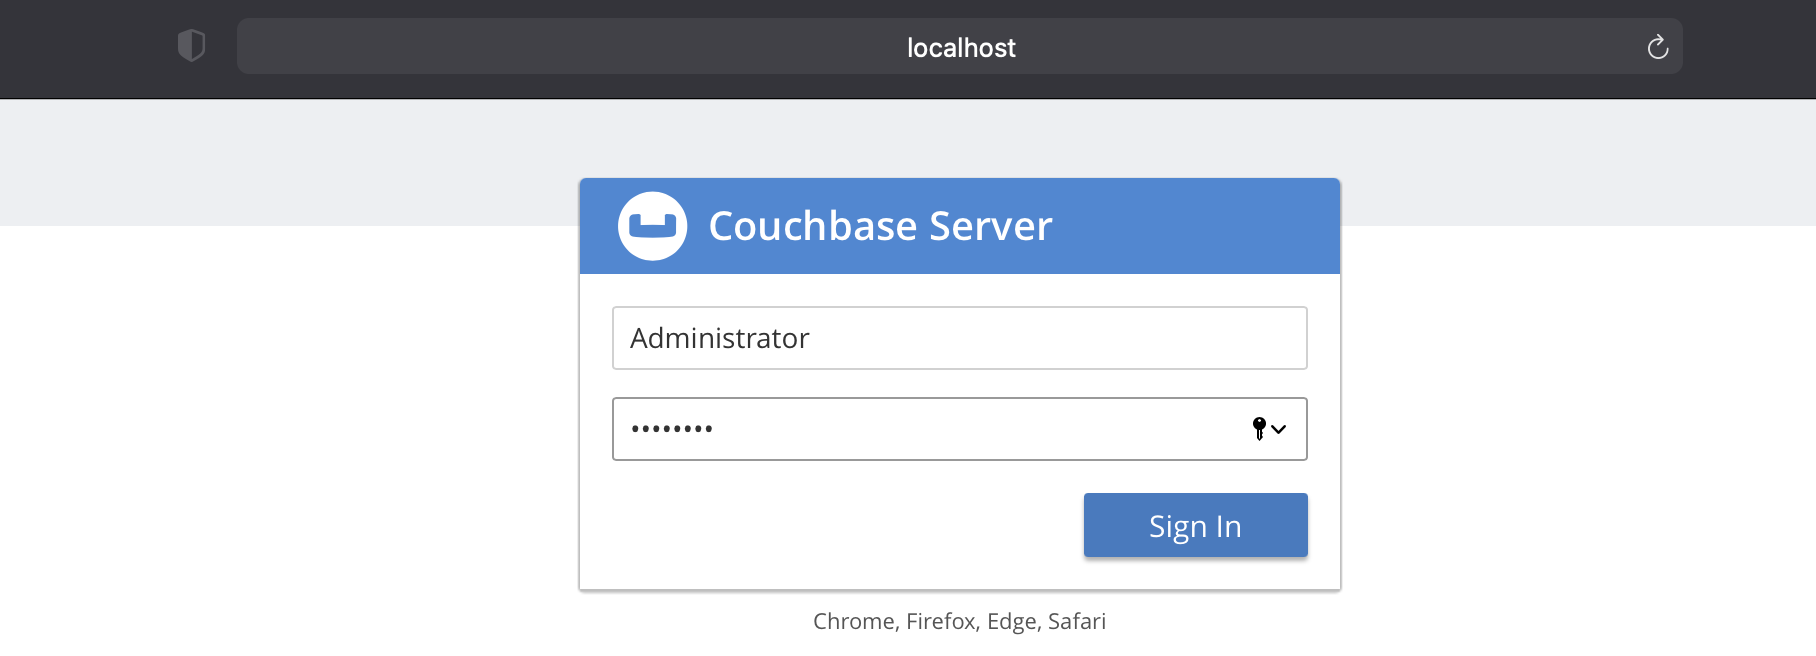 The Couchbase Admin